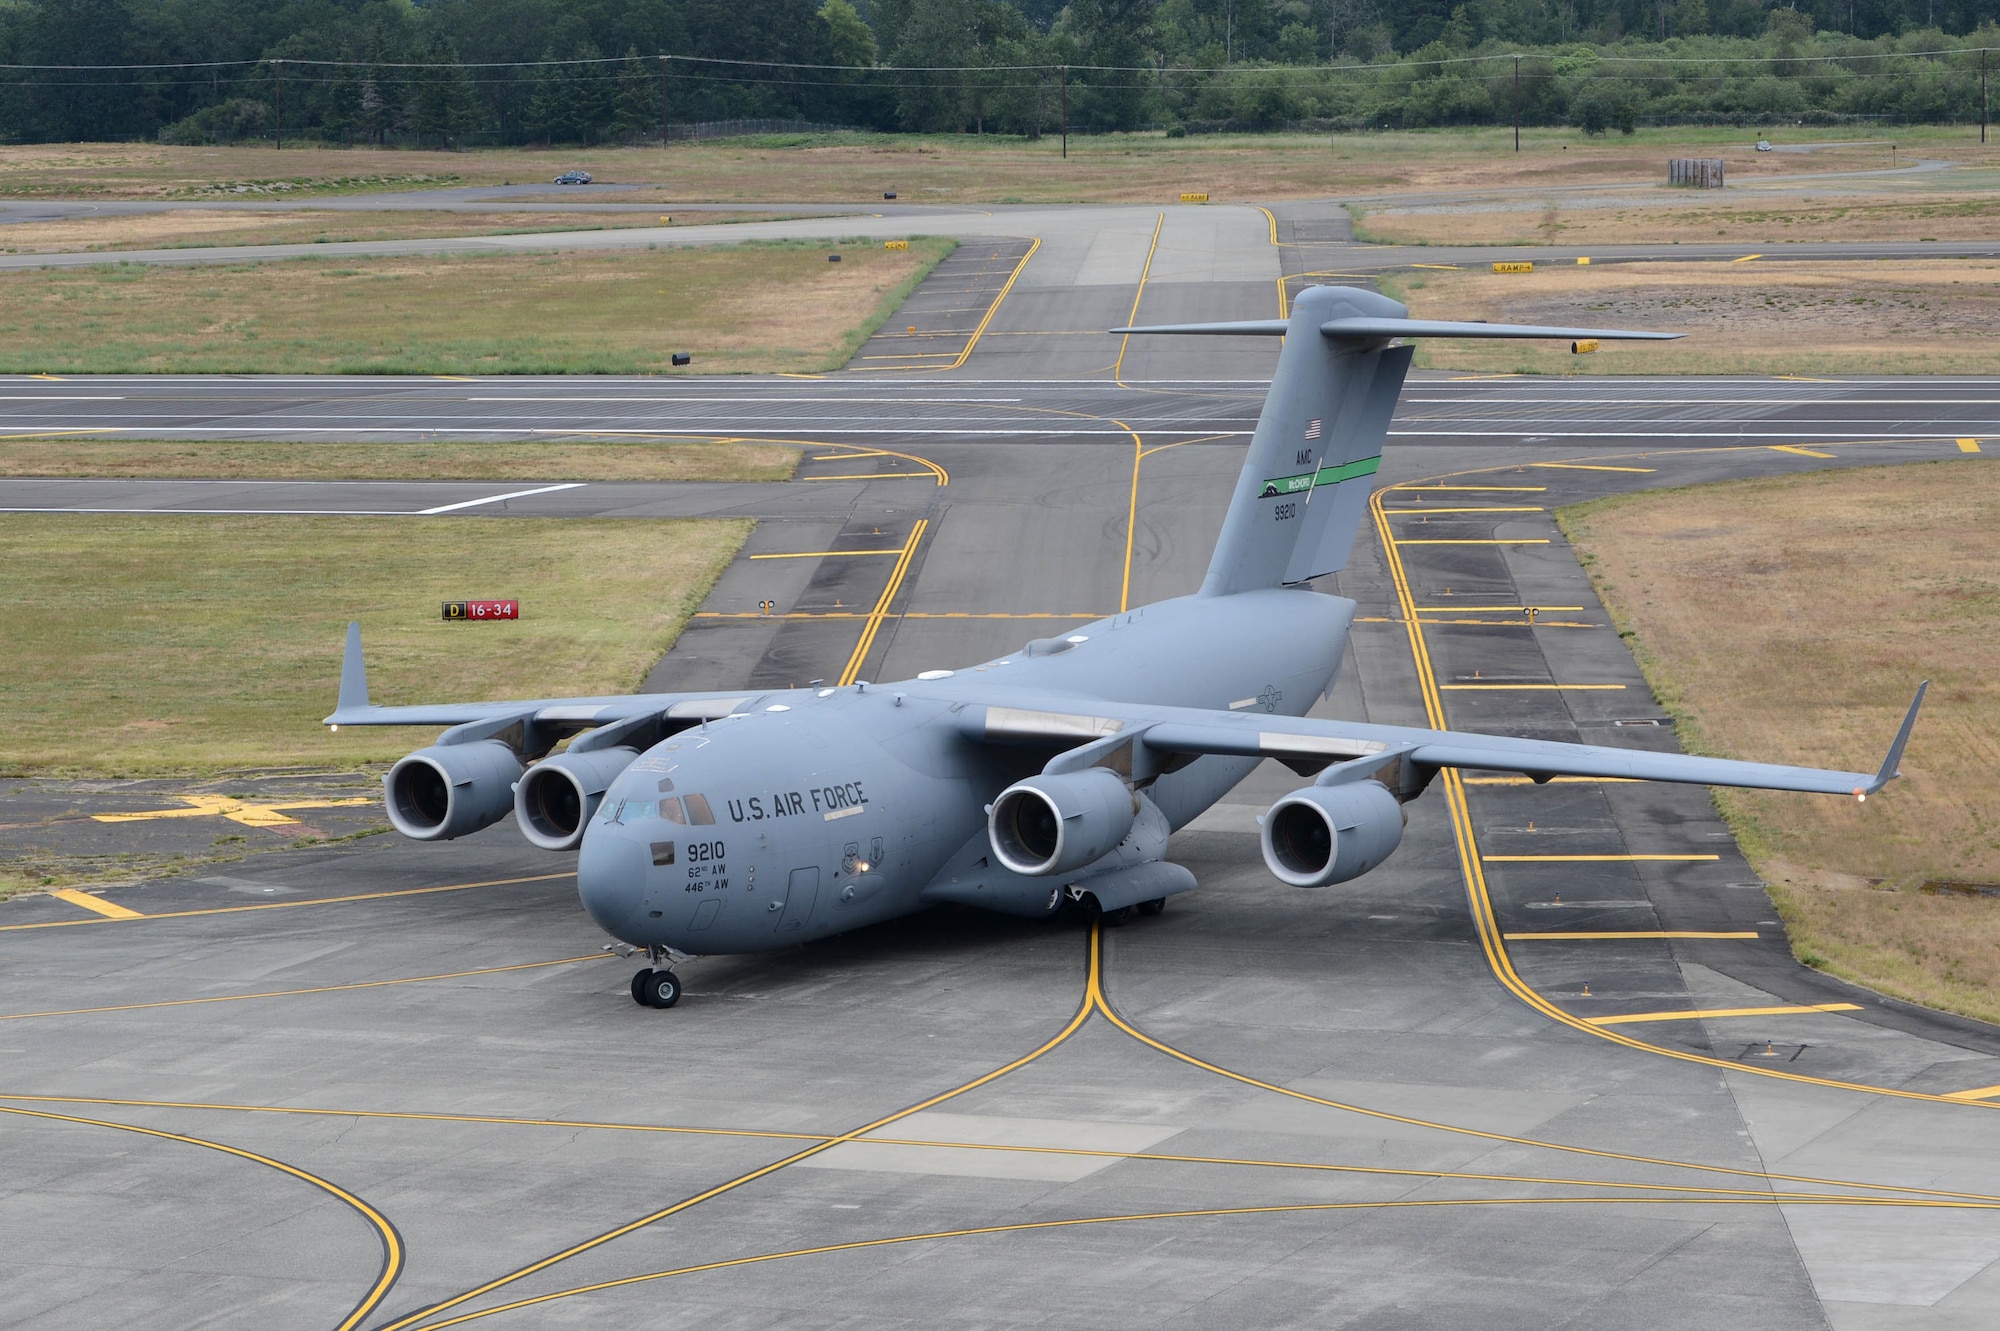 The first aircraft to land on the newly resurfaced runway taxis to its parking spot June 17, 2019 at Joint Base Lewis-McChord, Wash. McChord Field aircraft and Airmen were relocated to other west coast bases while the runway was resurfaced. (U.S. Air Force photo by Airman 1st Class Sara Hoerichs)